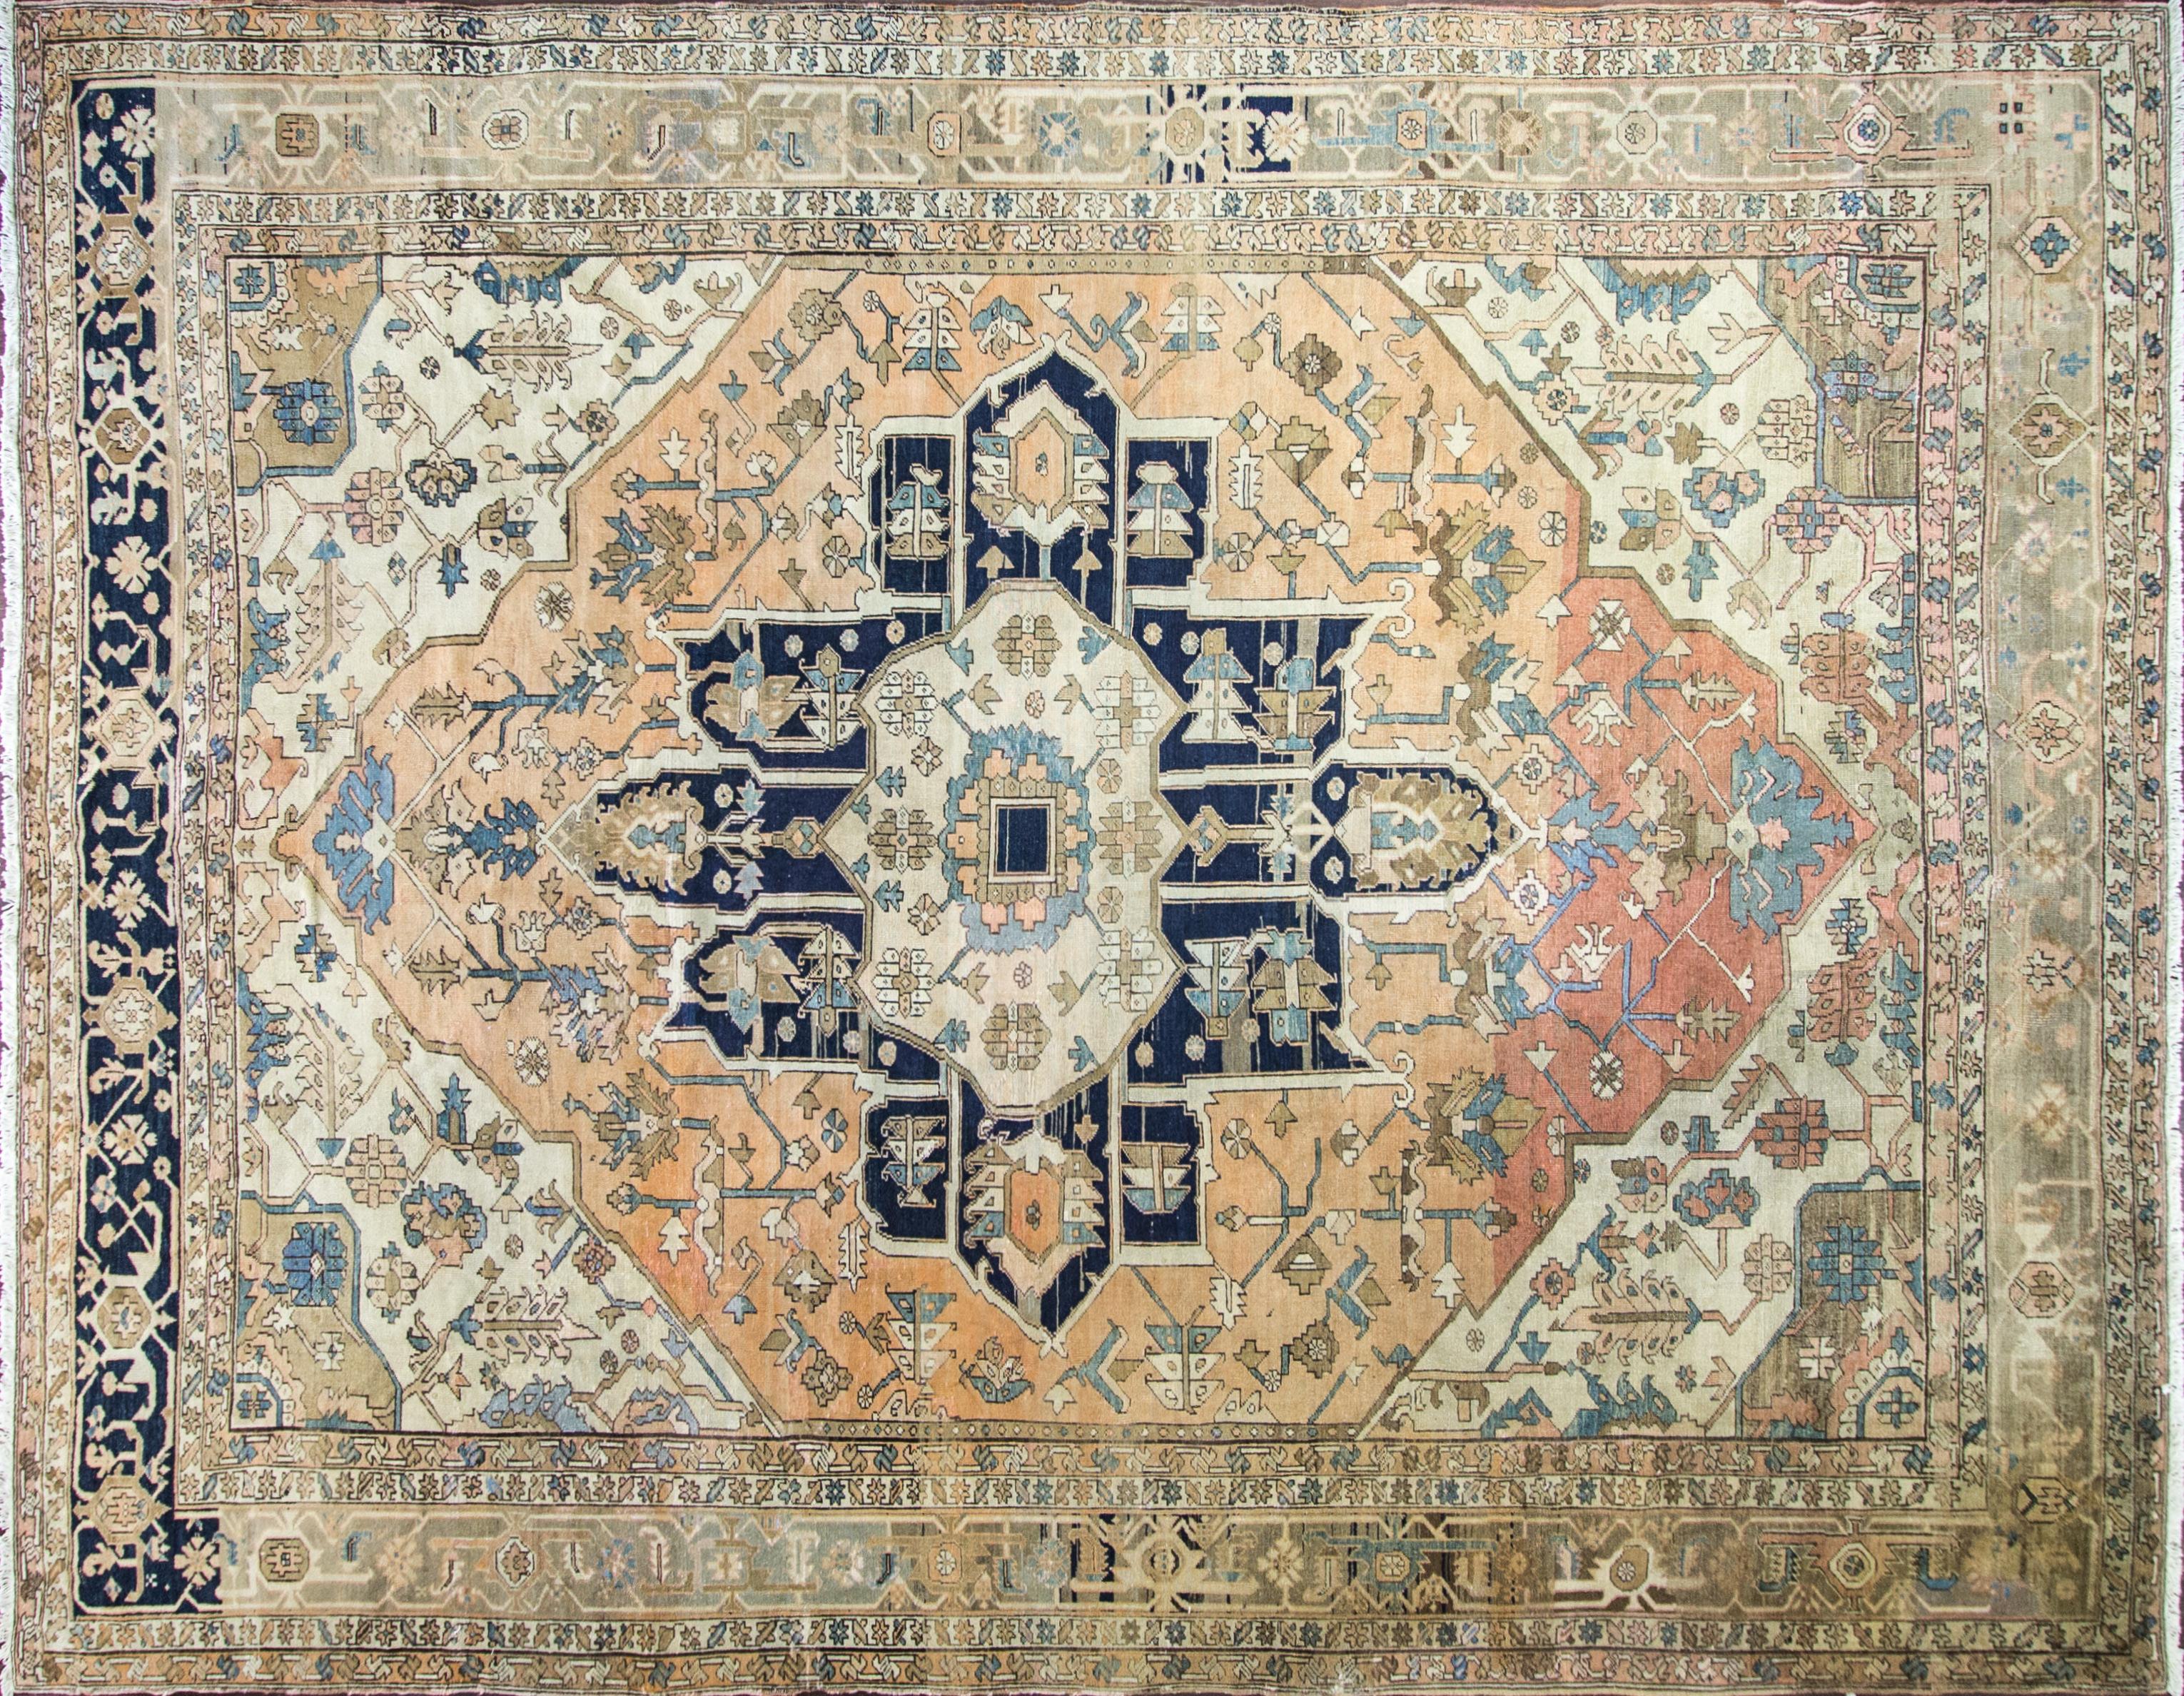 19th century 10' x 13' unusual antique Serapi carpet of Persia. Very unusual colors.
Woven in the rugged mountains of Northwest Persia, Serapi rugs are a distinct Heriz region style, with finer knotting and more large-scale spaciously placed